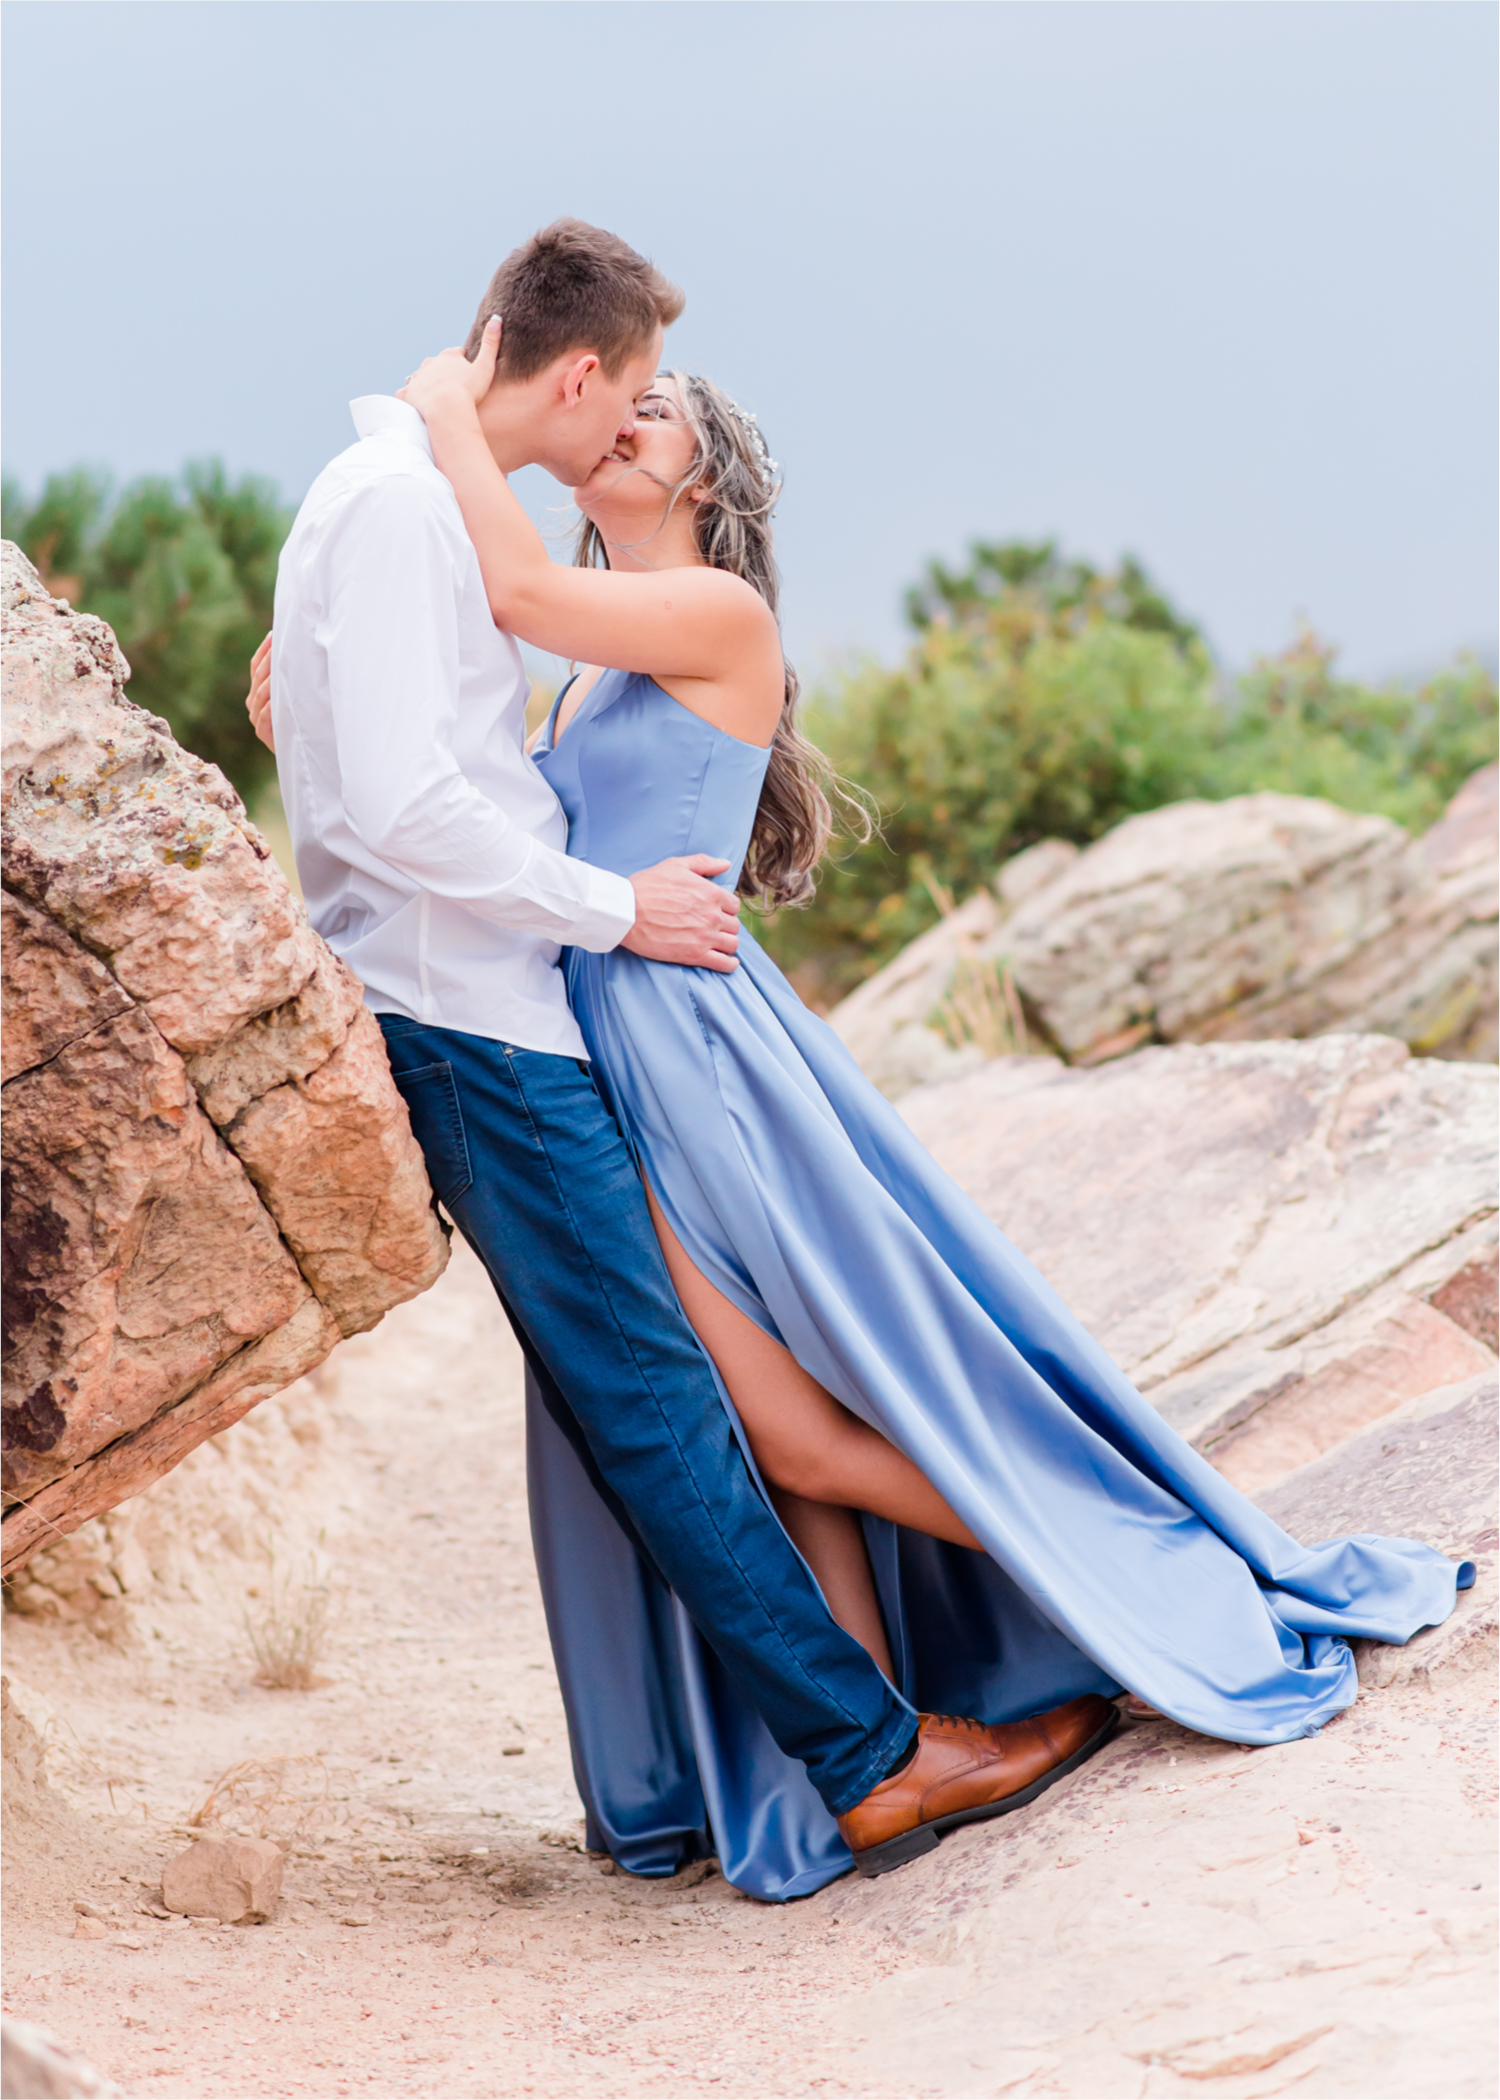 Romantic and Playful Summer engagement session at Horsetooth Reservoir in Fort Collins Colorado | Britni Girard Photographer | Wedding photographer and videographer team | Stormy and Windy Engagement on the cliffs of Horsetooth | Rotary Park